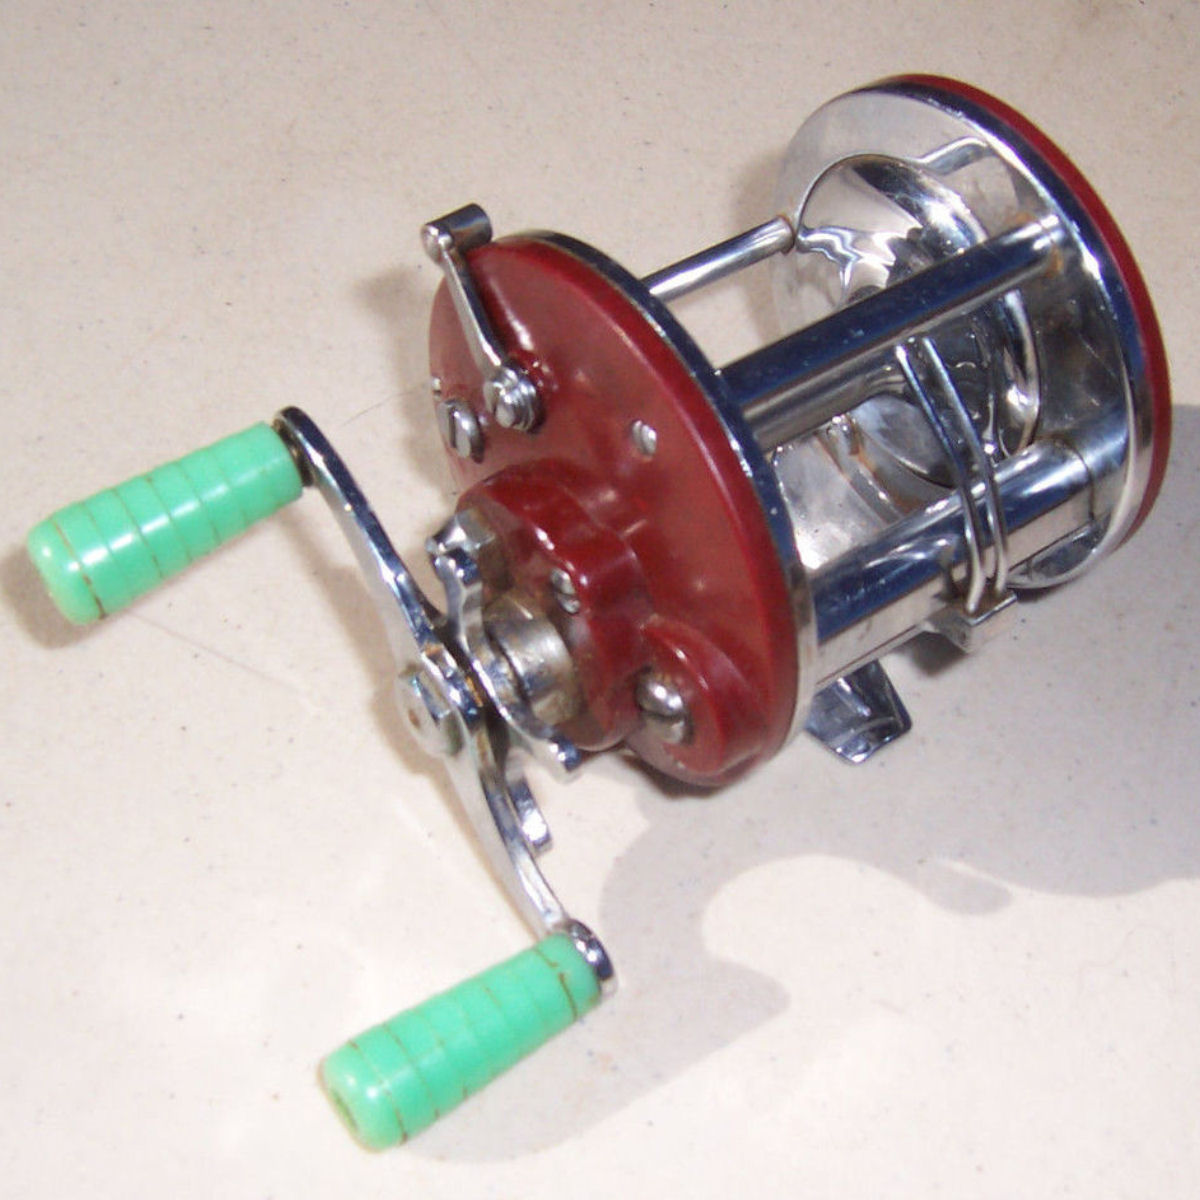 How to oil and lube a Penn reel without disassembly using model 209 